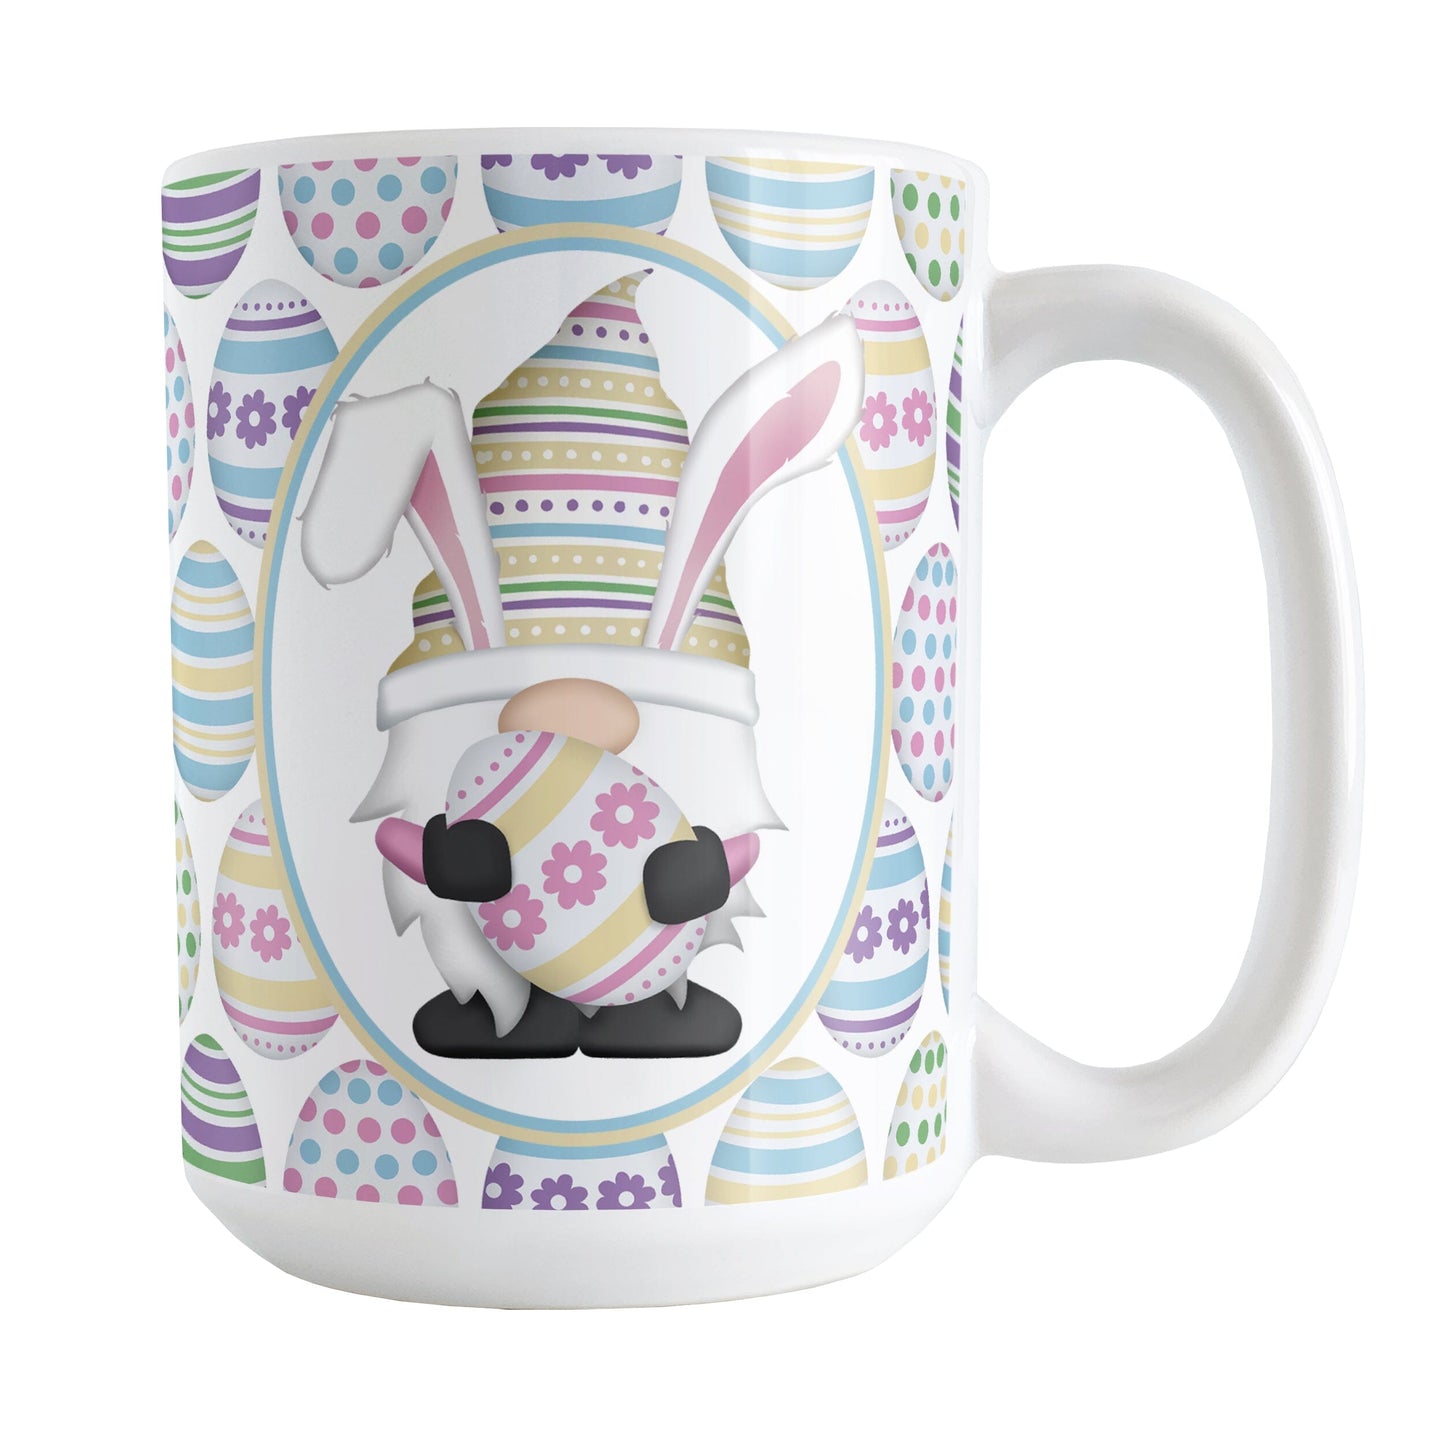 Easter Gnome Eggs Mug (15oz) at Amy's Coffee Mugs. A ceramic coffee mug designed with an illustration of an adorable gnome with bunny ears, holding a large pink and yellow Easter egg, in a white oval on both sides of the mug over a decorated Easter eggs pattern.